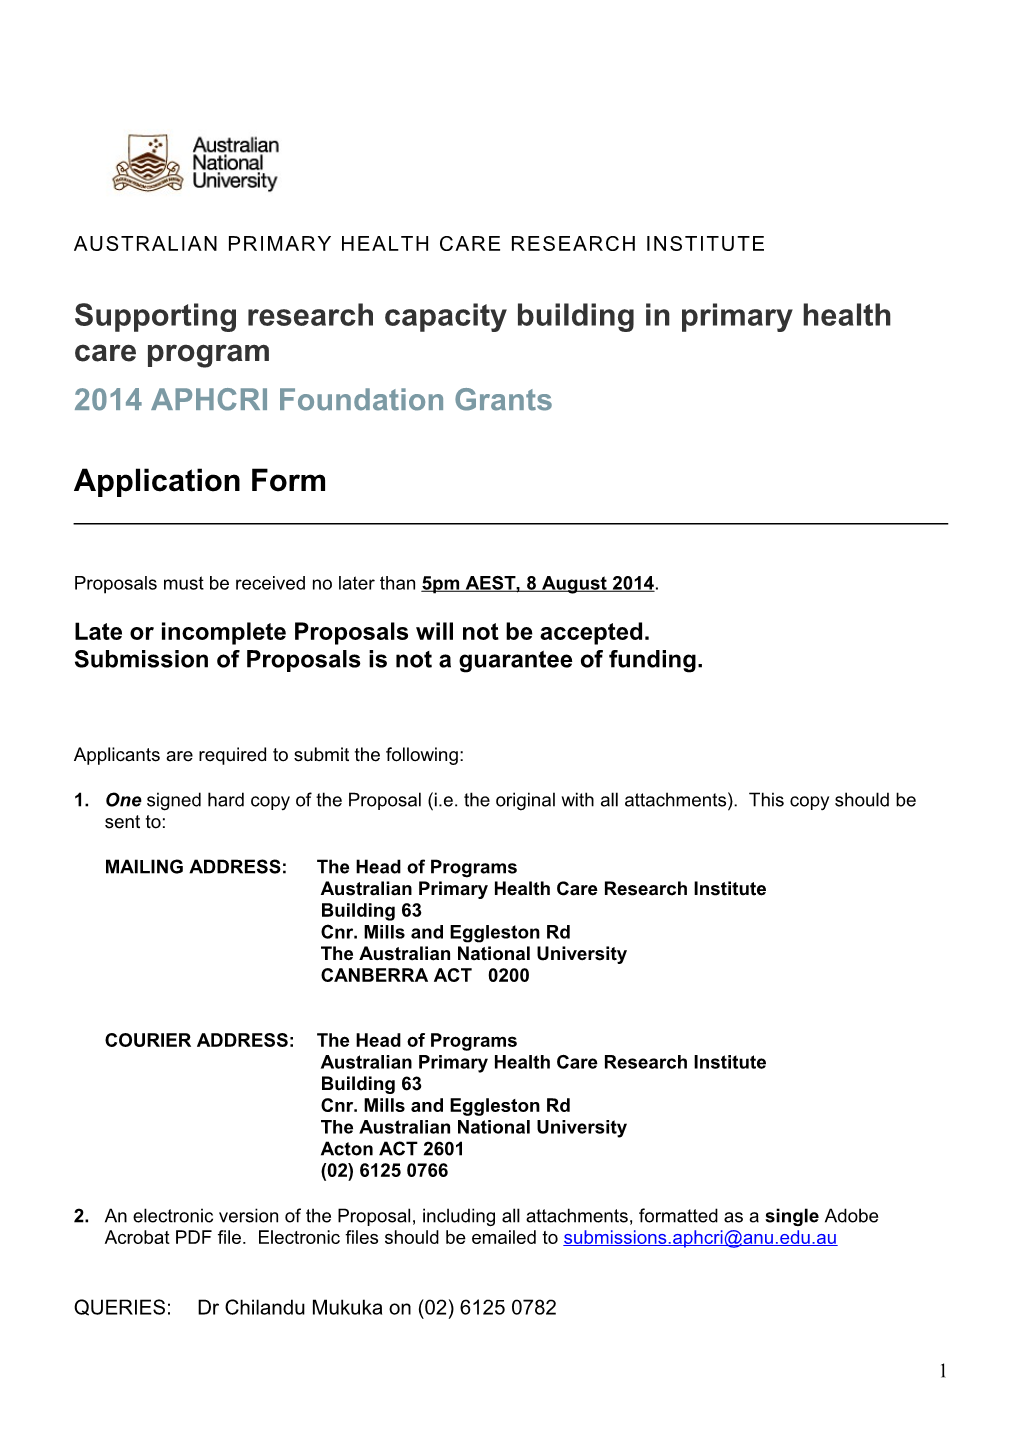 Supporting Research Capacity Building in Primary Health Care Program